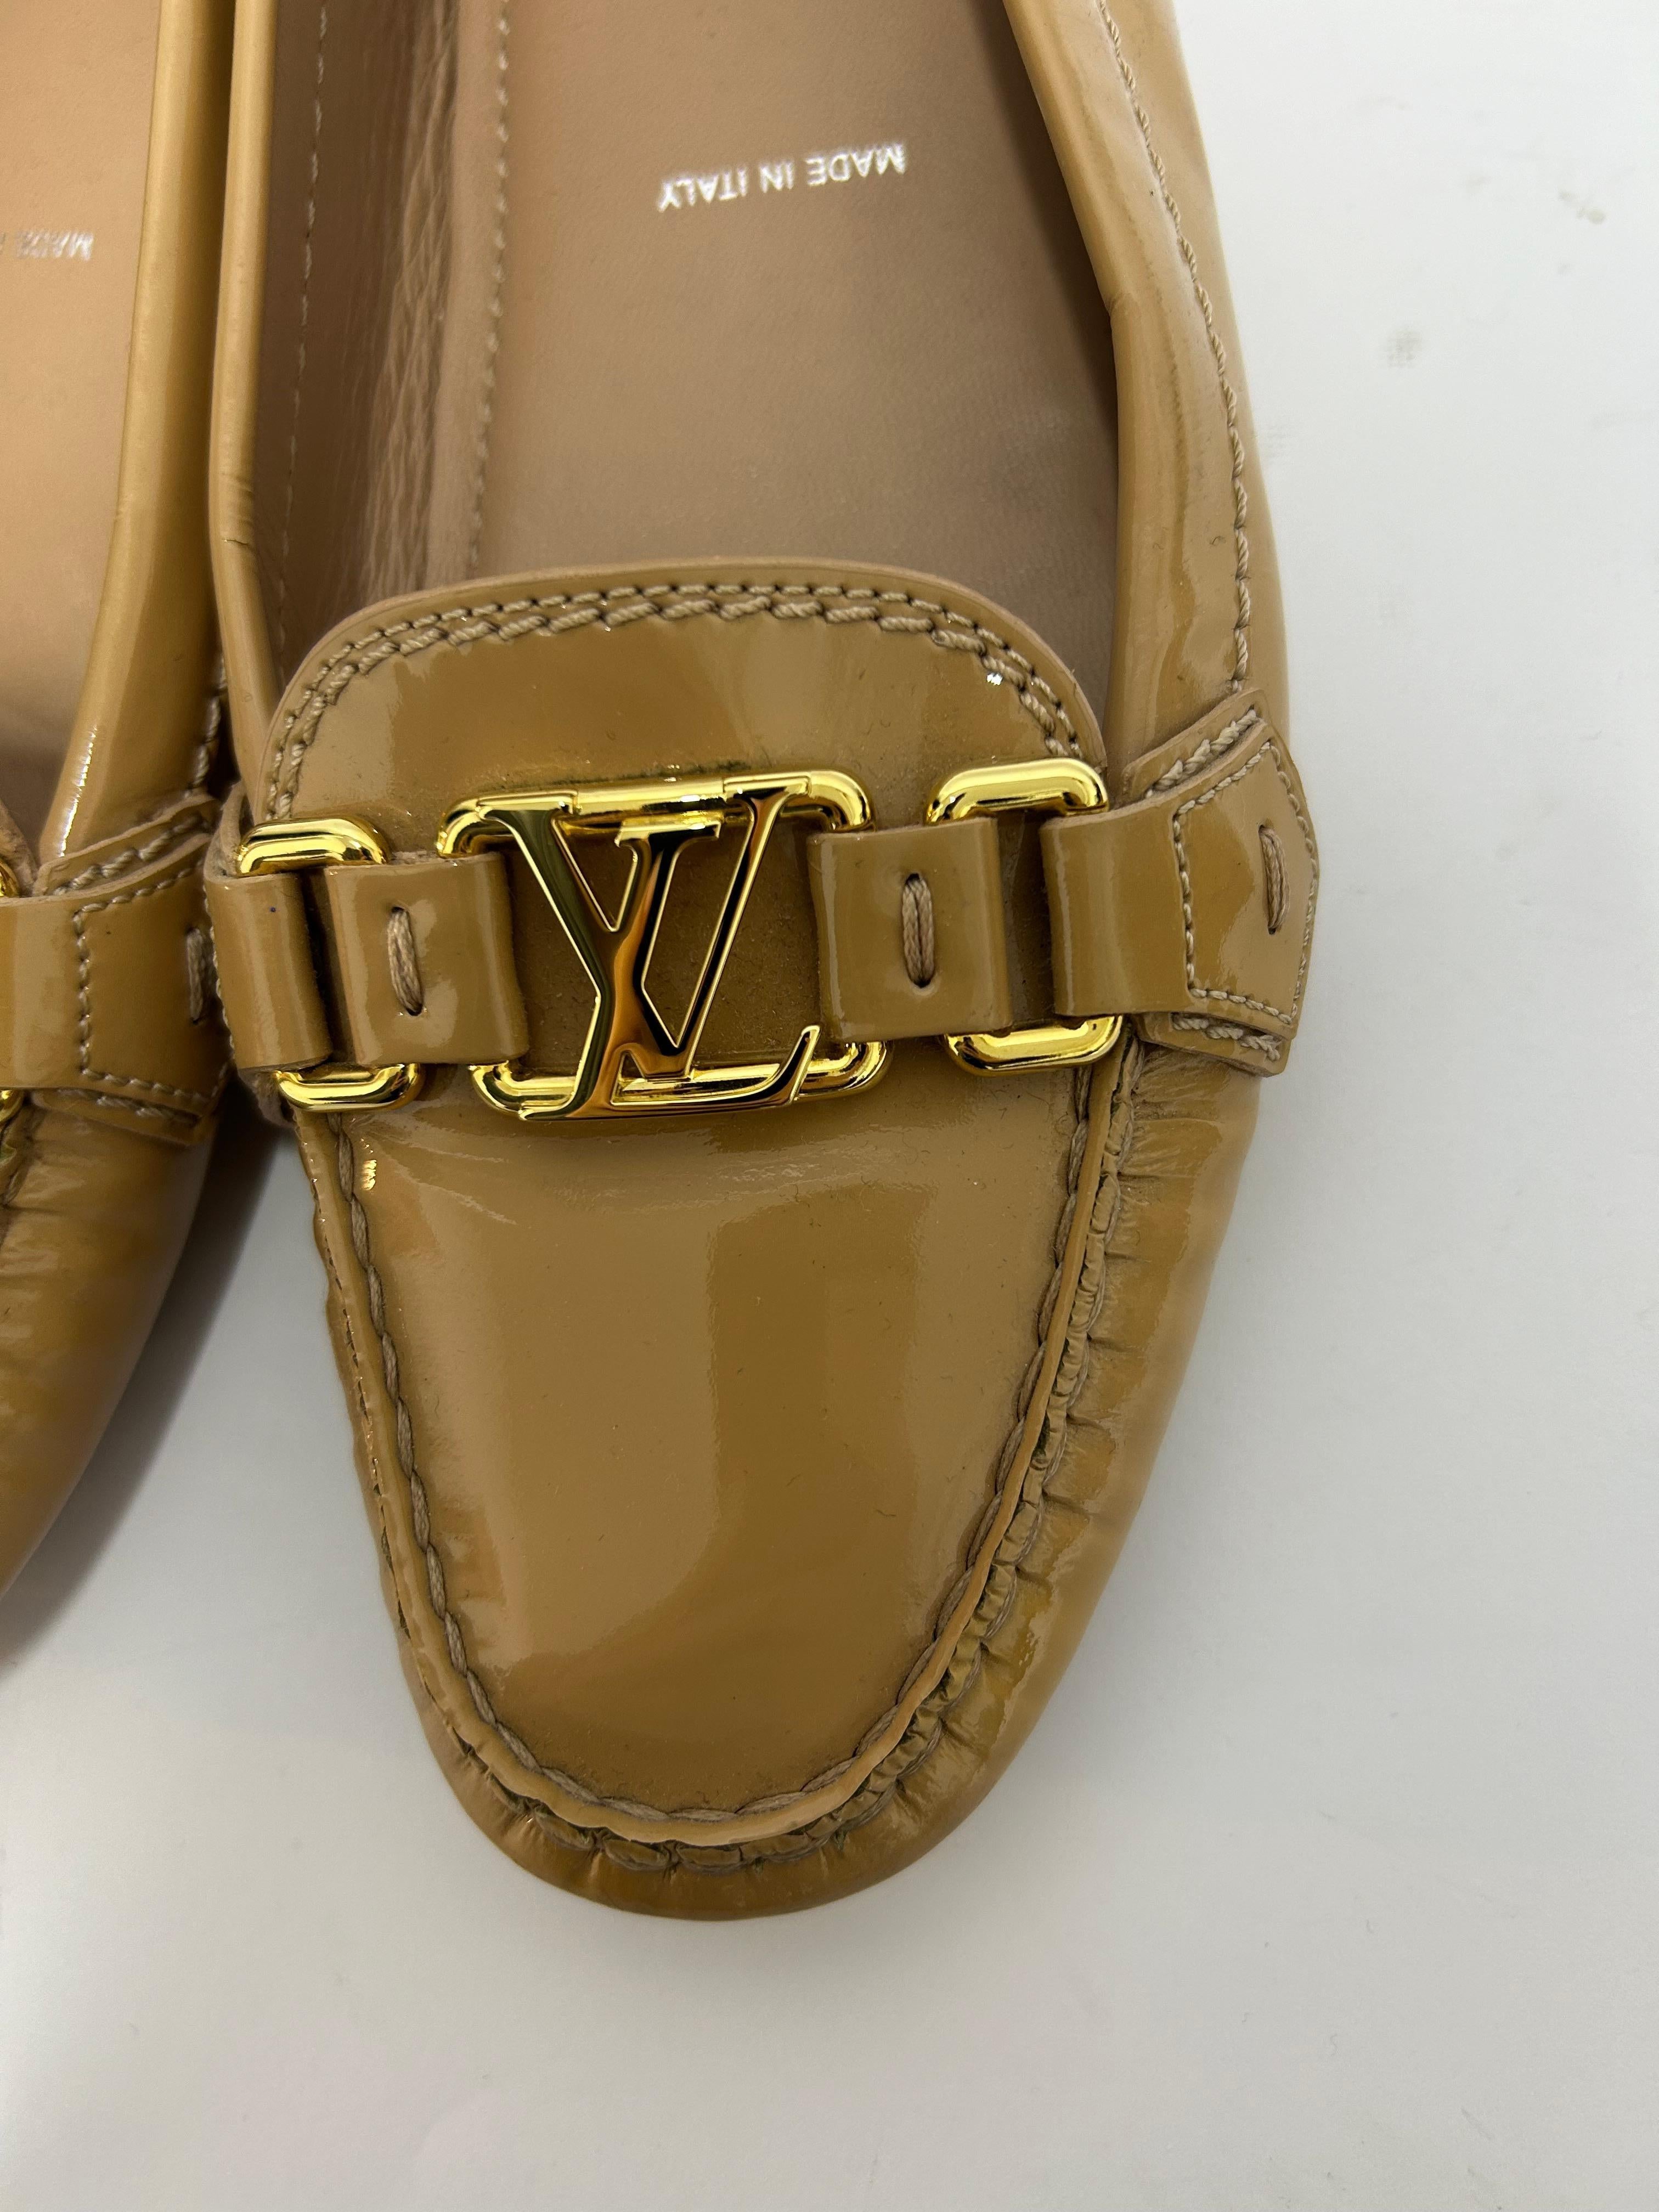 Louis Vuitton Oxford Loafers Size EU 37 For Sale 2